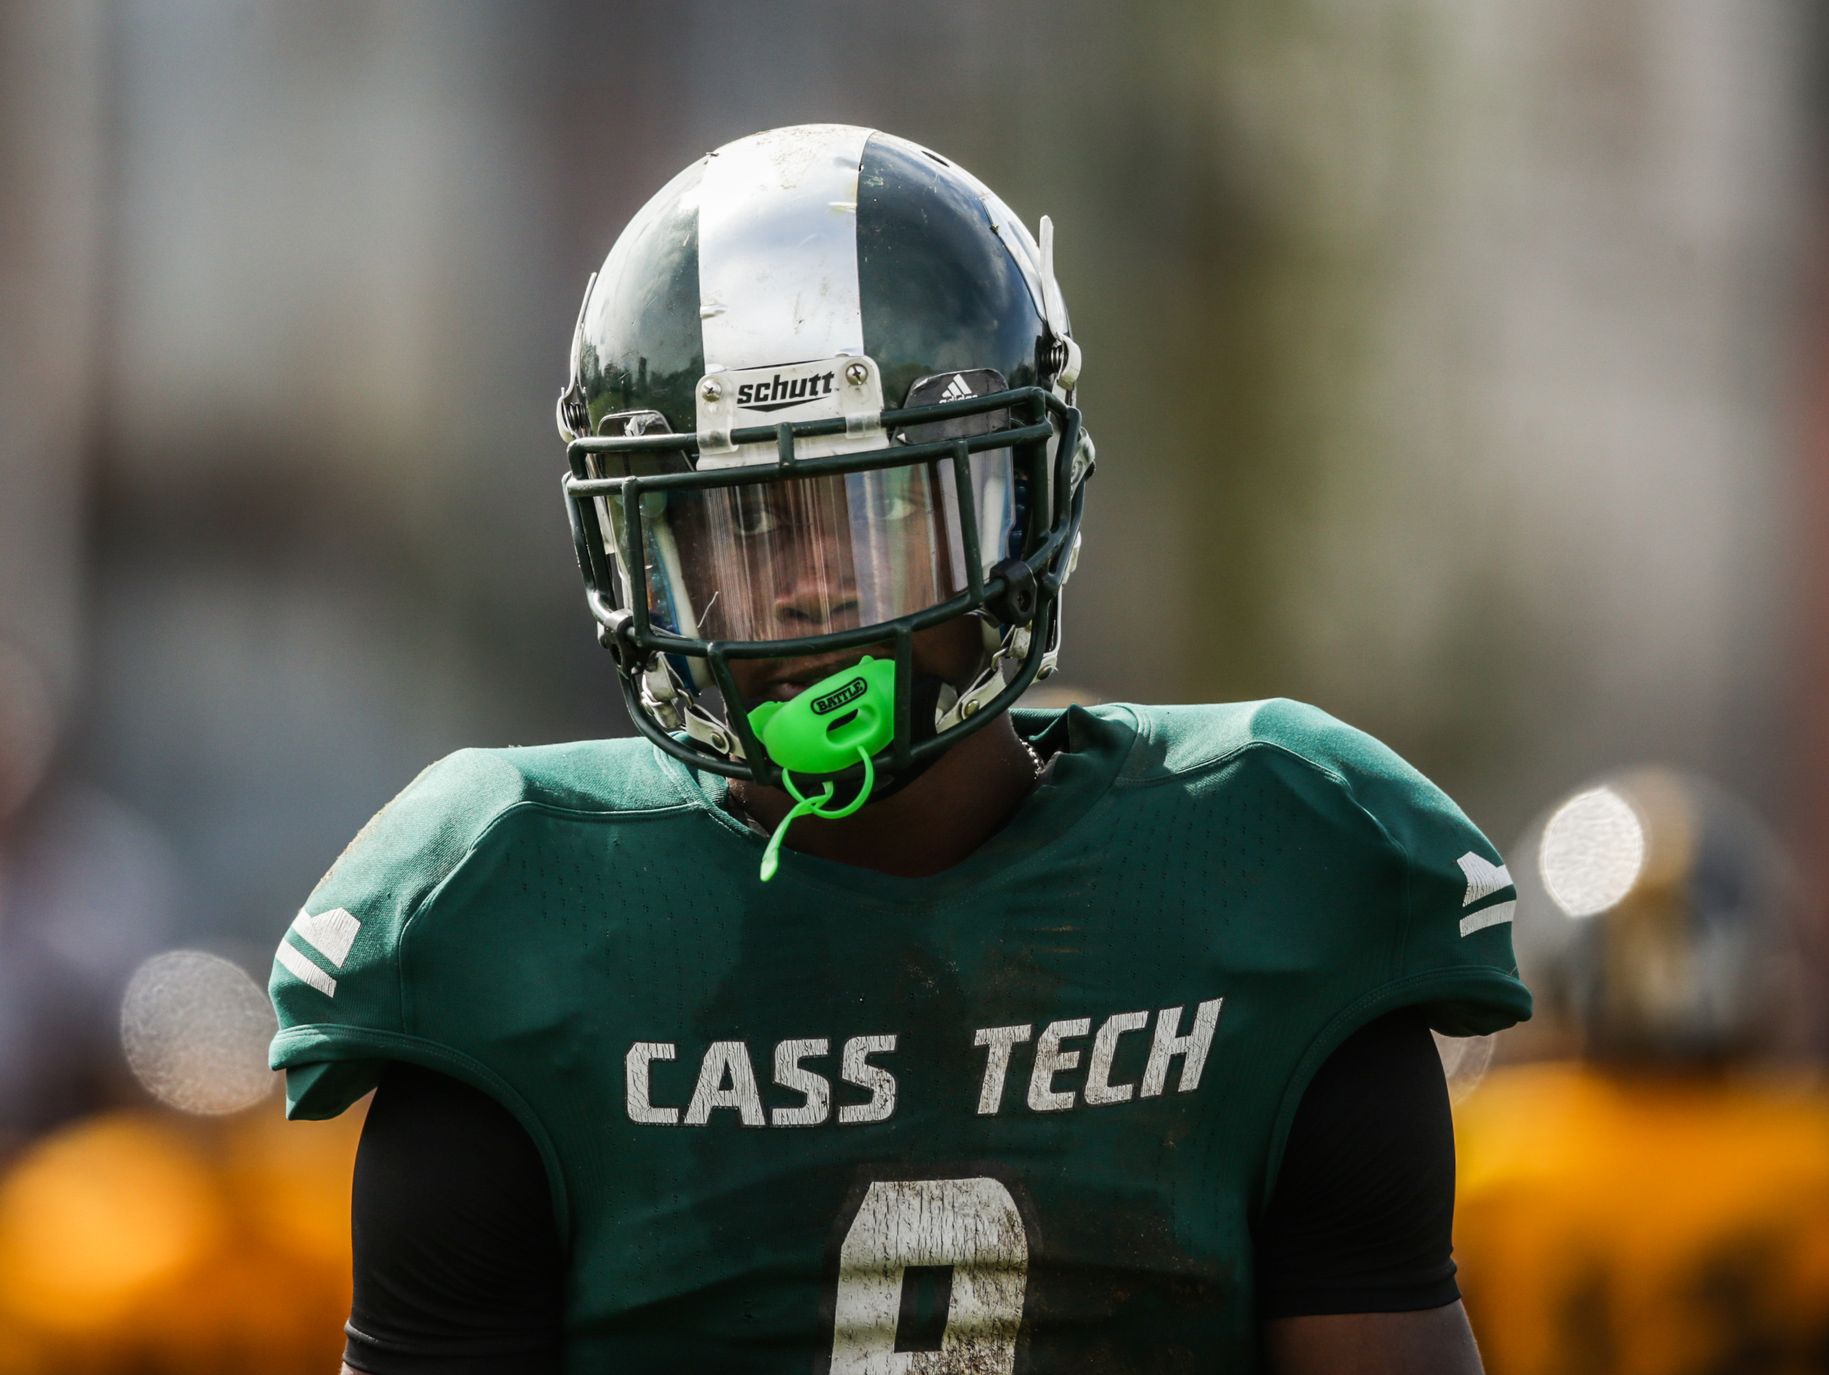 Detroit Cass Tech receiver Donovan Peoples-Jones during a game against Detroit King on Saturday, Oct. 1, 2016, in Detroit.